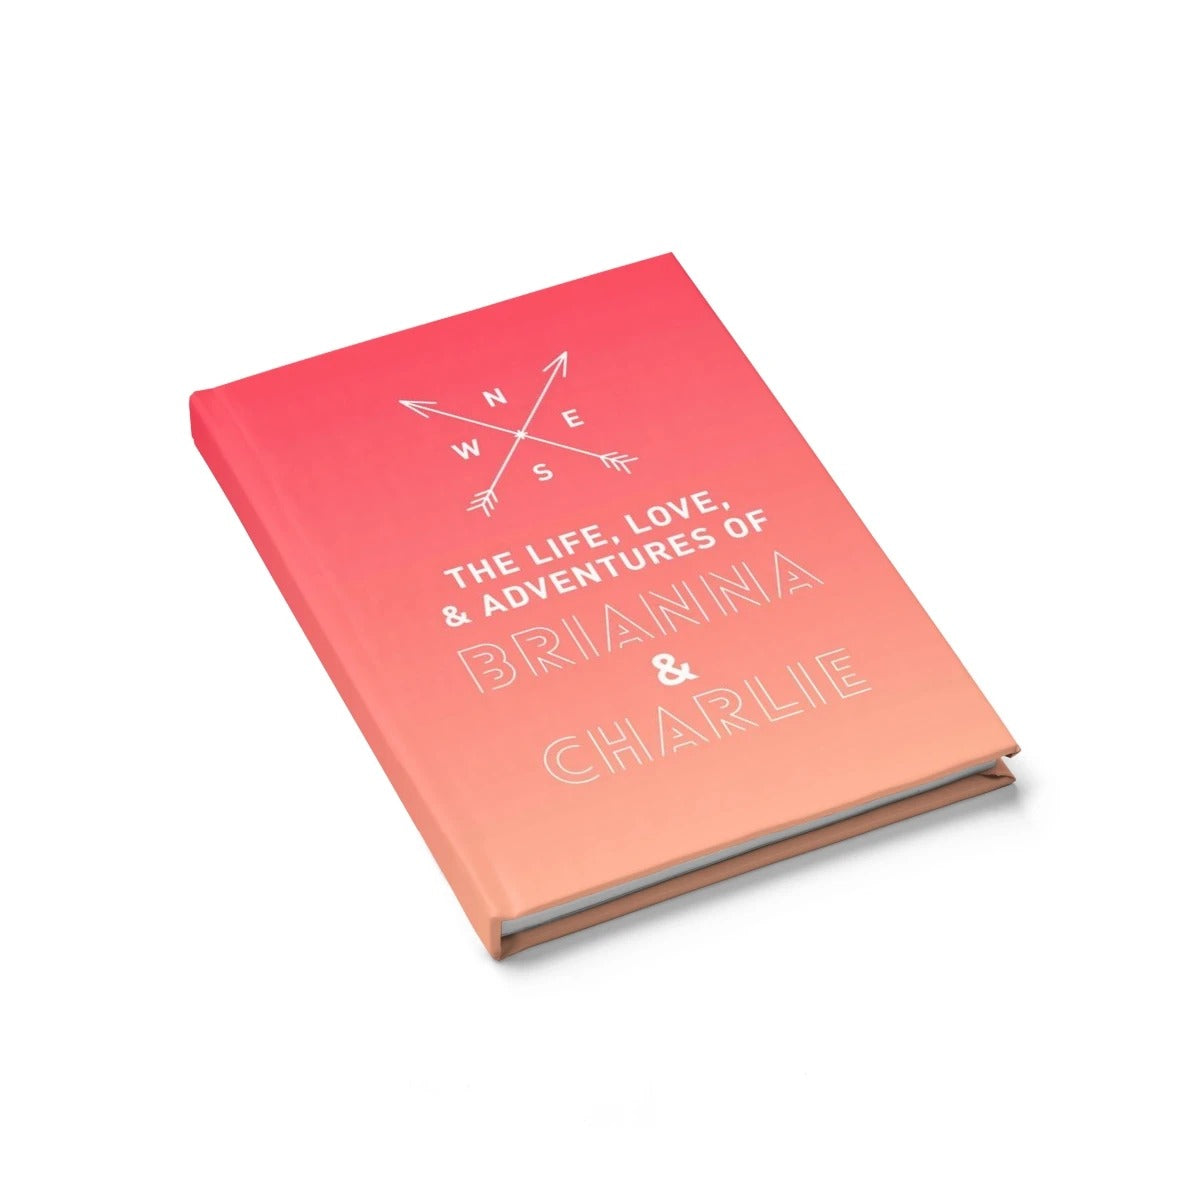 Personalized 'Comrades in Life, Love & Adventures Travel Journal' - Un –  Journo Travel Goods